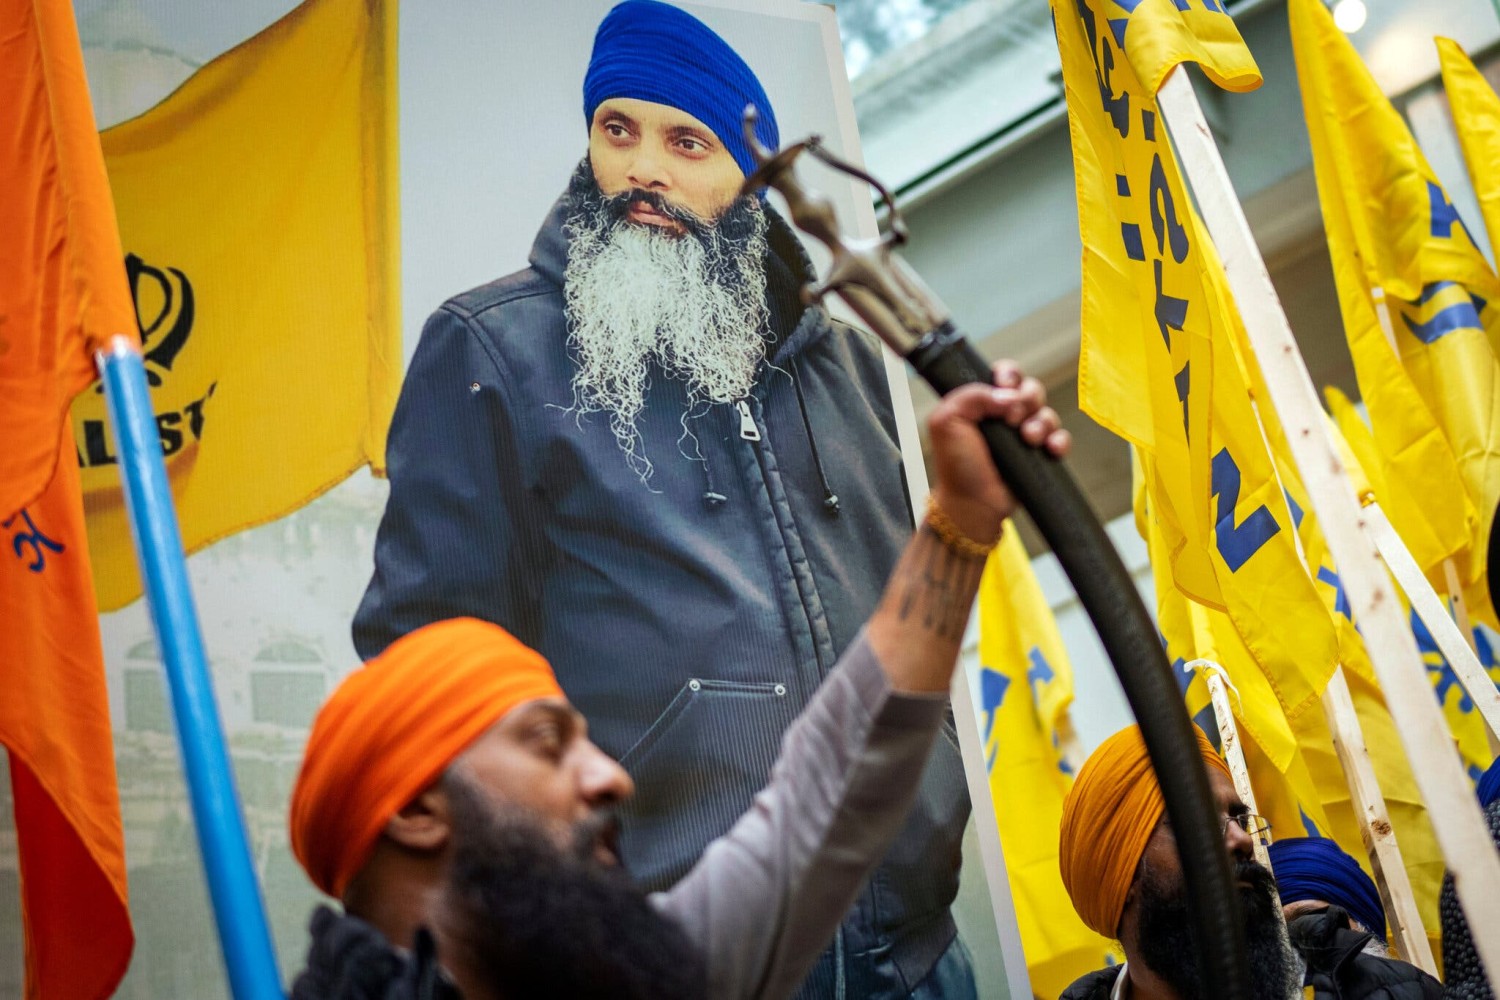 U.S. Provided Canada With Intelligence on Killing of Sikh Leader